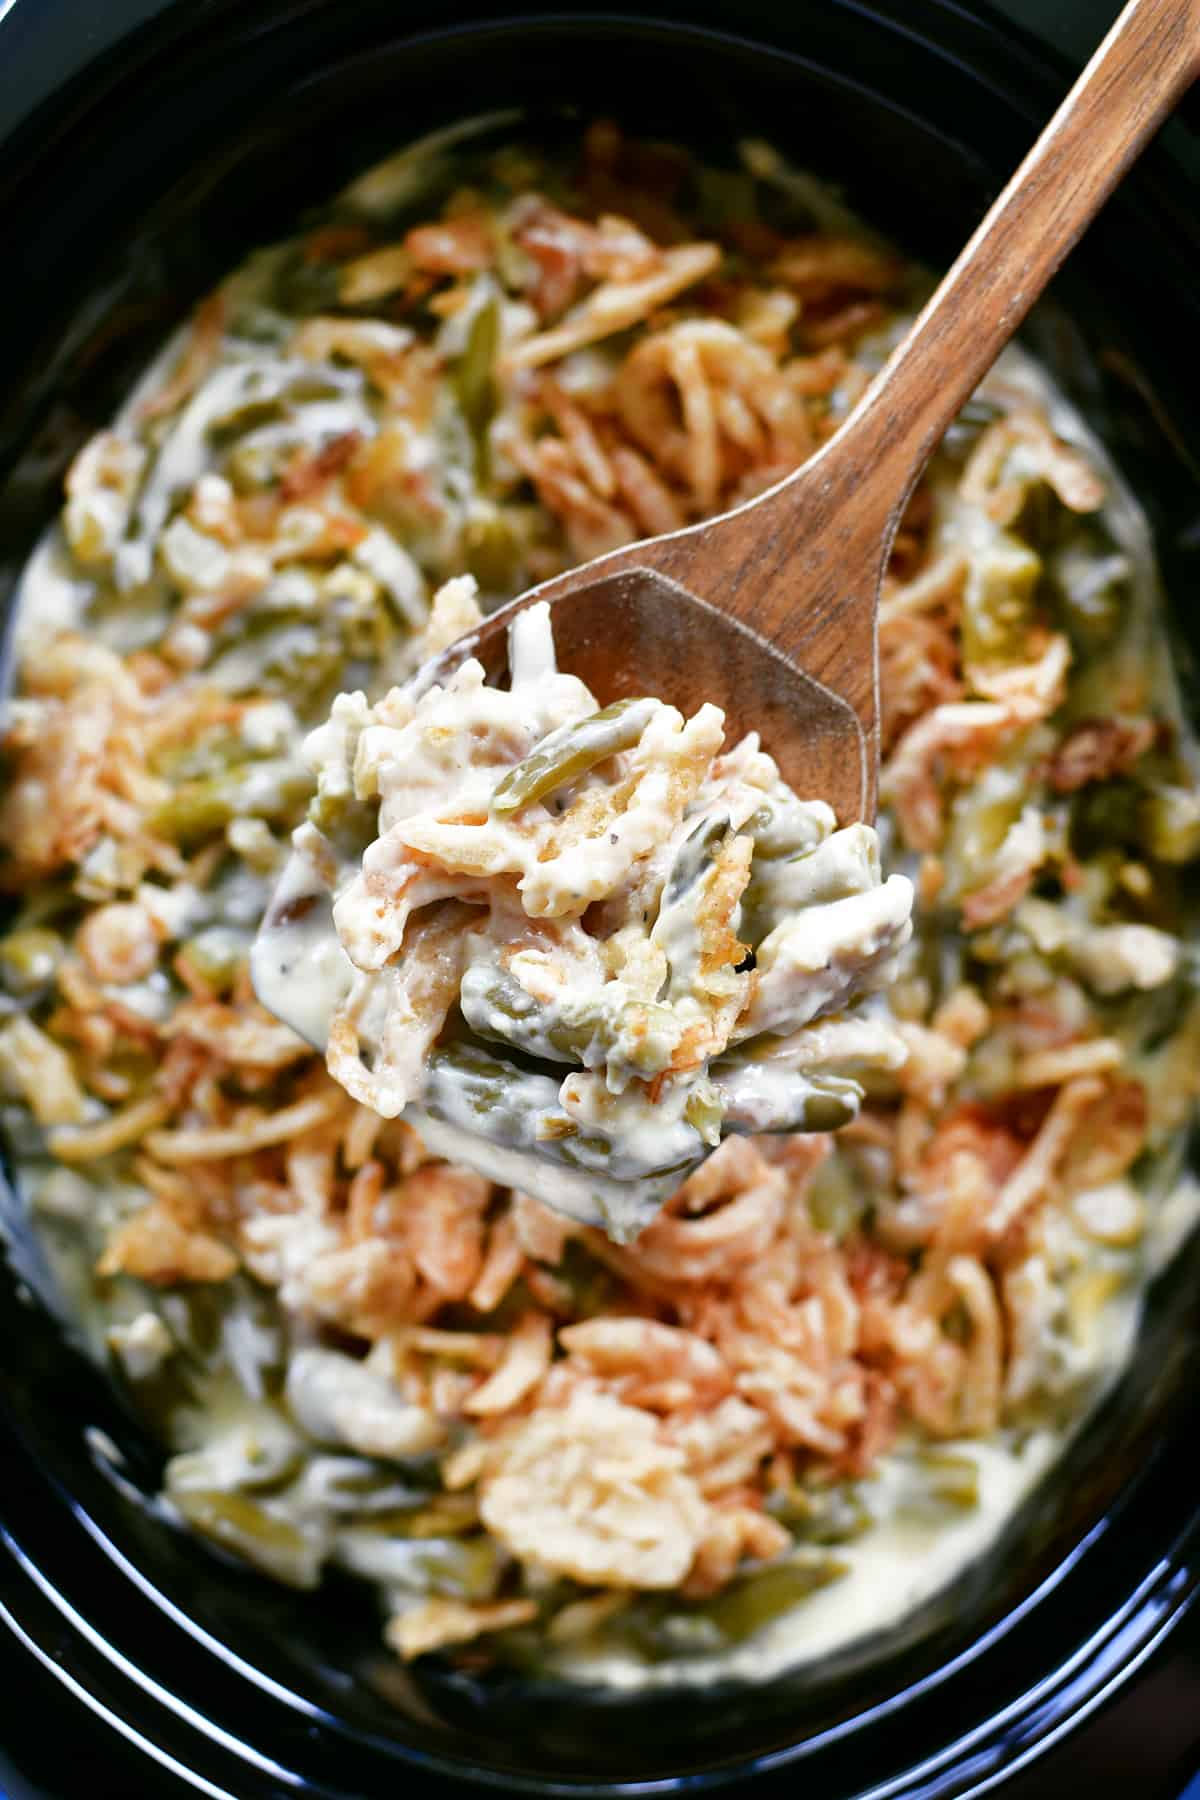 Green bean casserole cooked in the crock pot